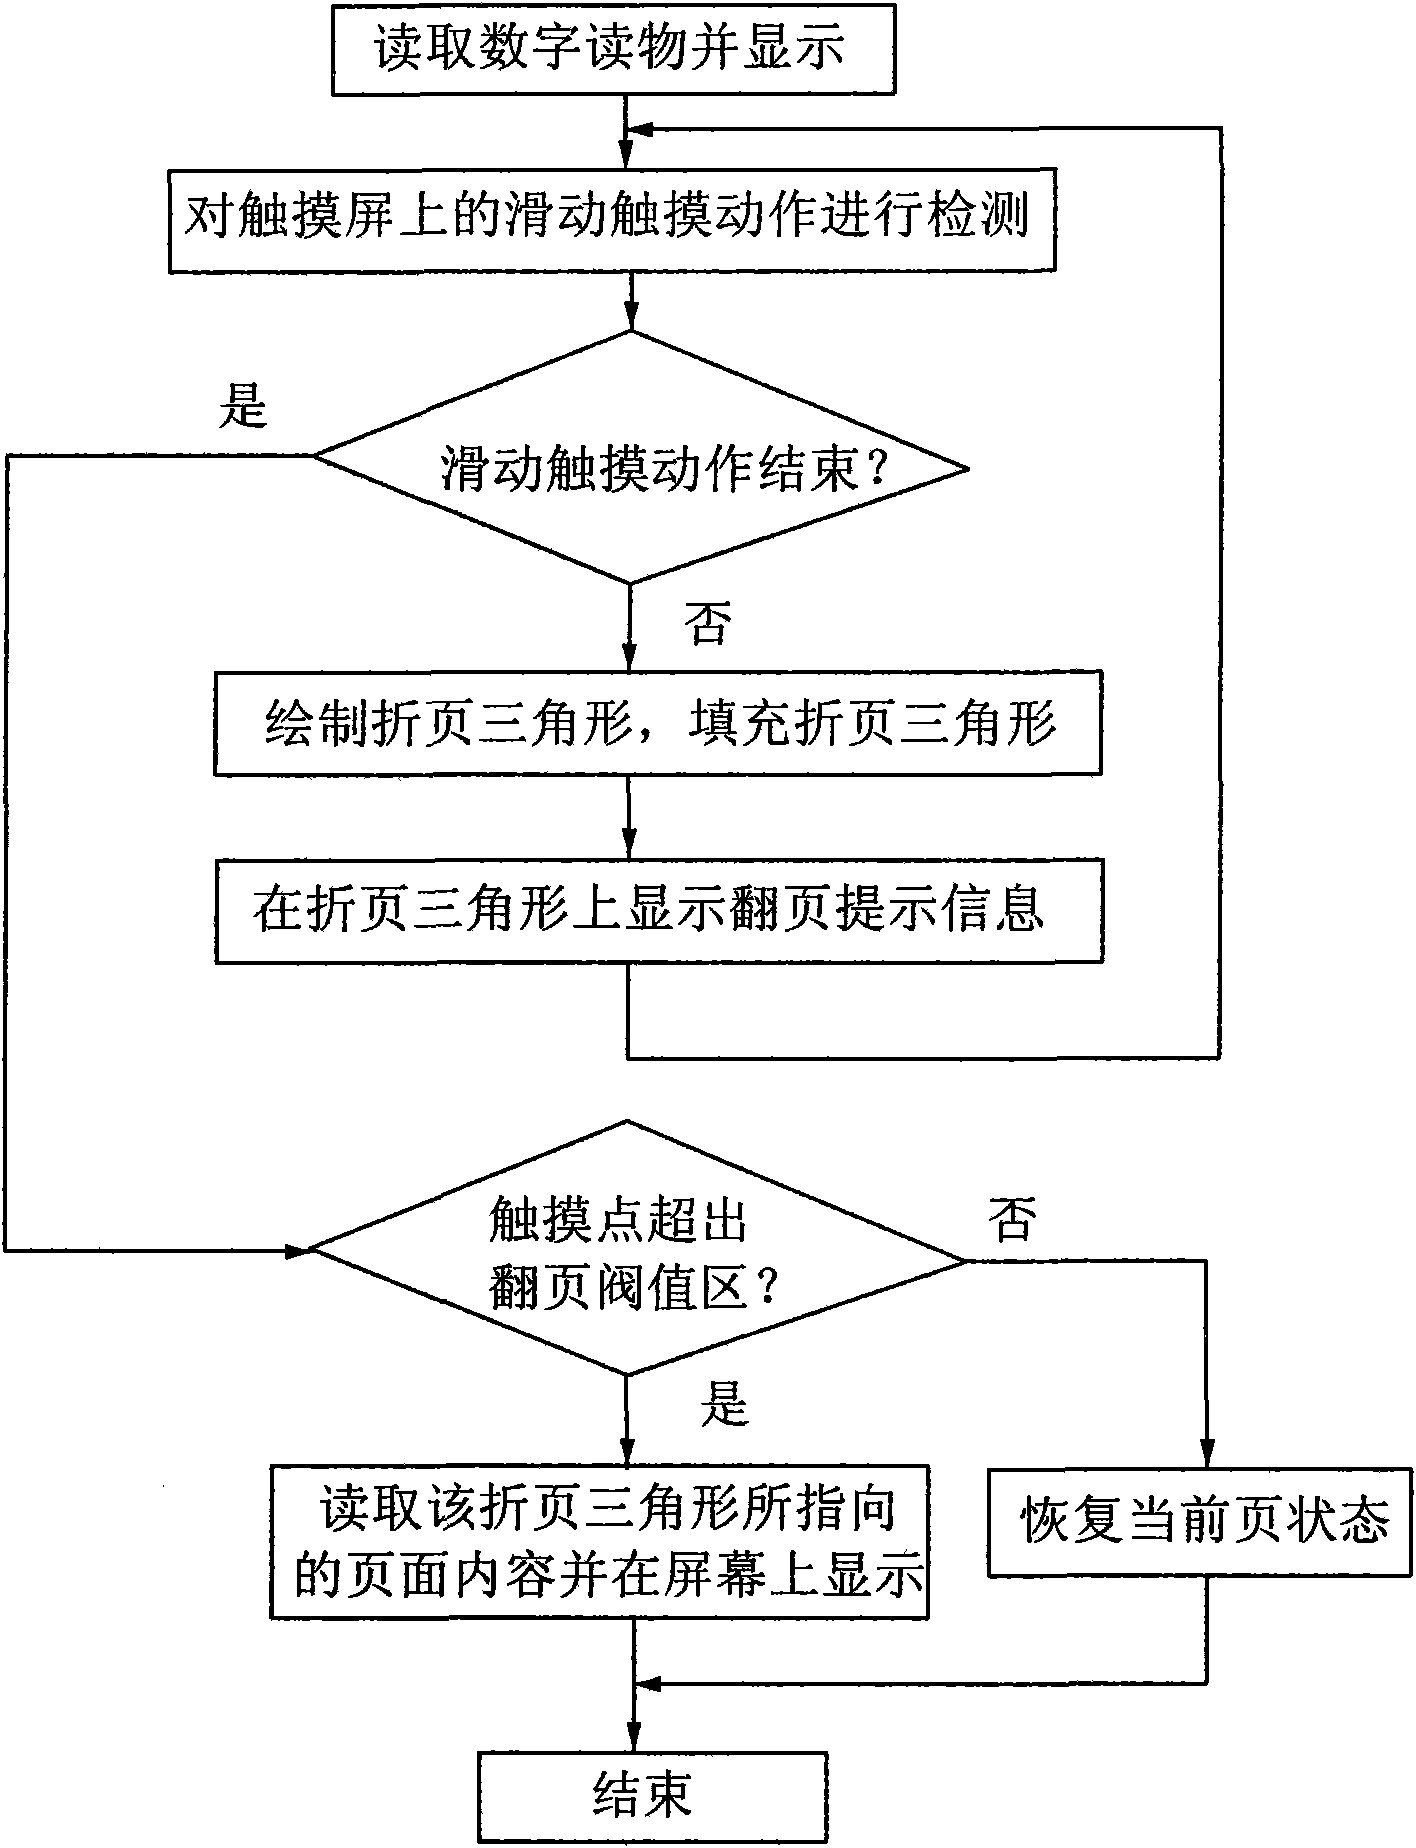 Touch page turning processing method based on electronic paper reading device